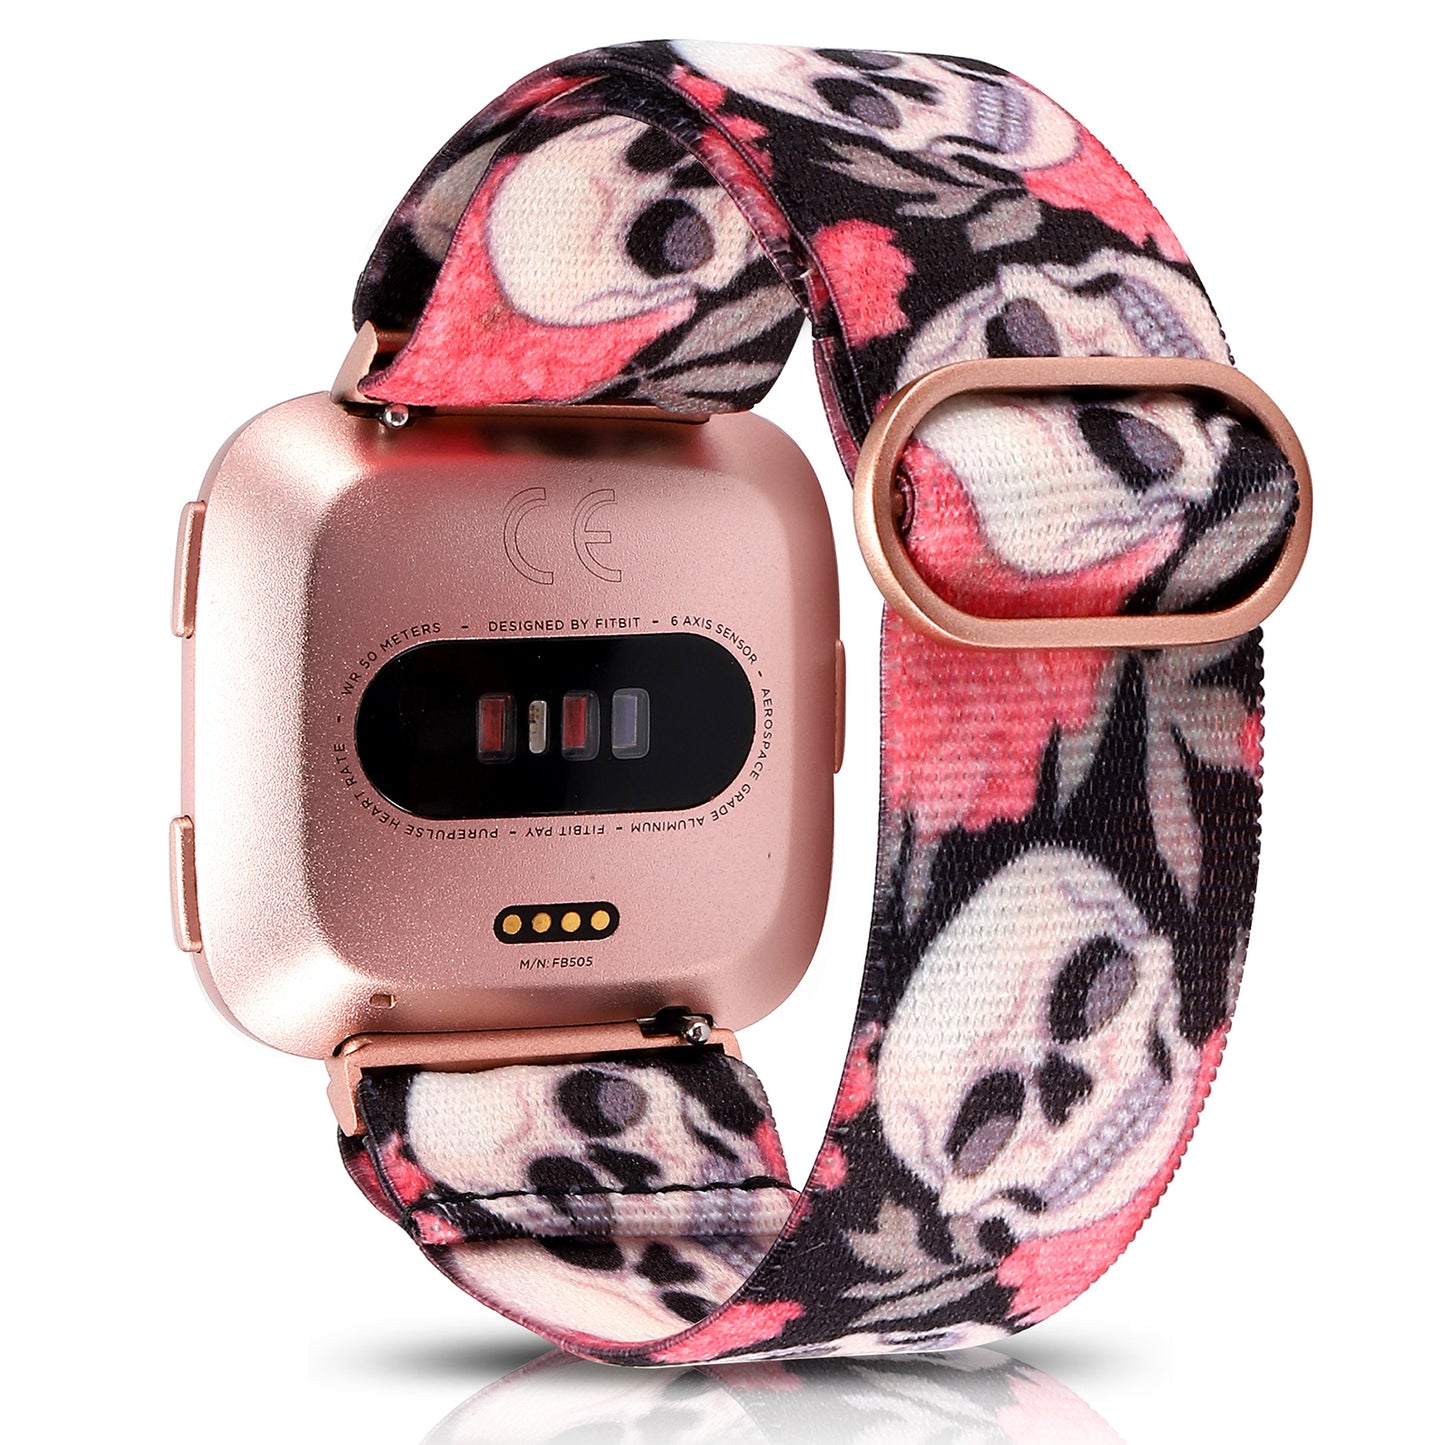 TOYOUTHS Compatible with Fitbit Versa/Versa 2 Bands for Women Men Adjustable Elastic Nylon Fabric Strap Replacement for Versa Lite Edition Stretchy Solo Loop Bracelet Wristband Accessories